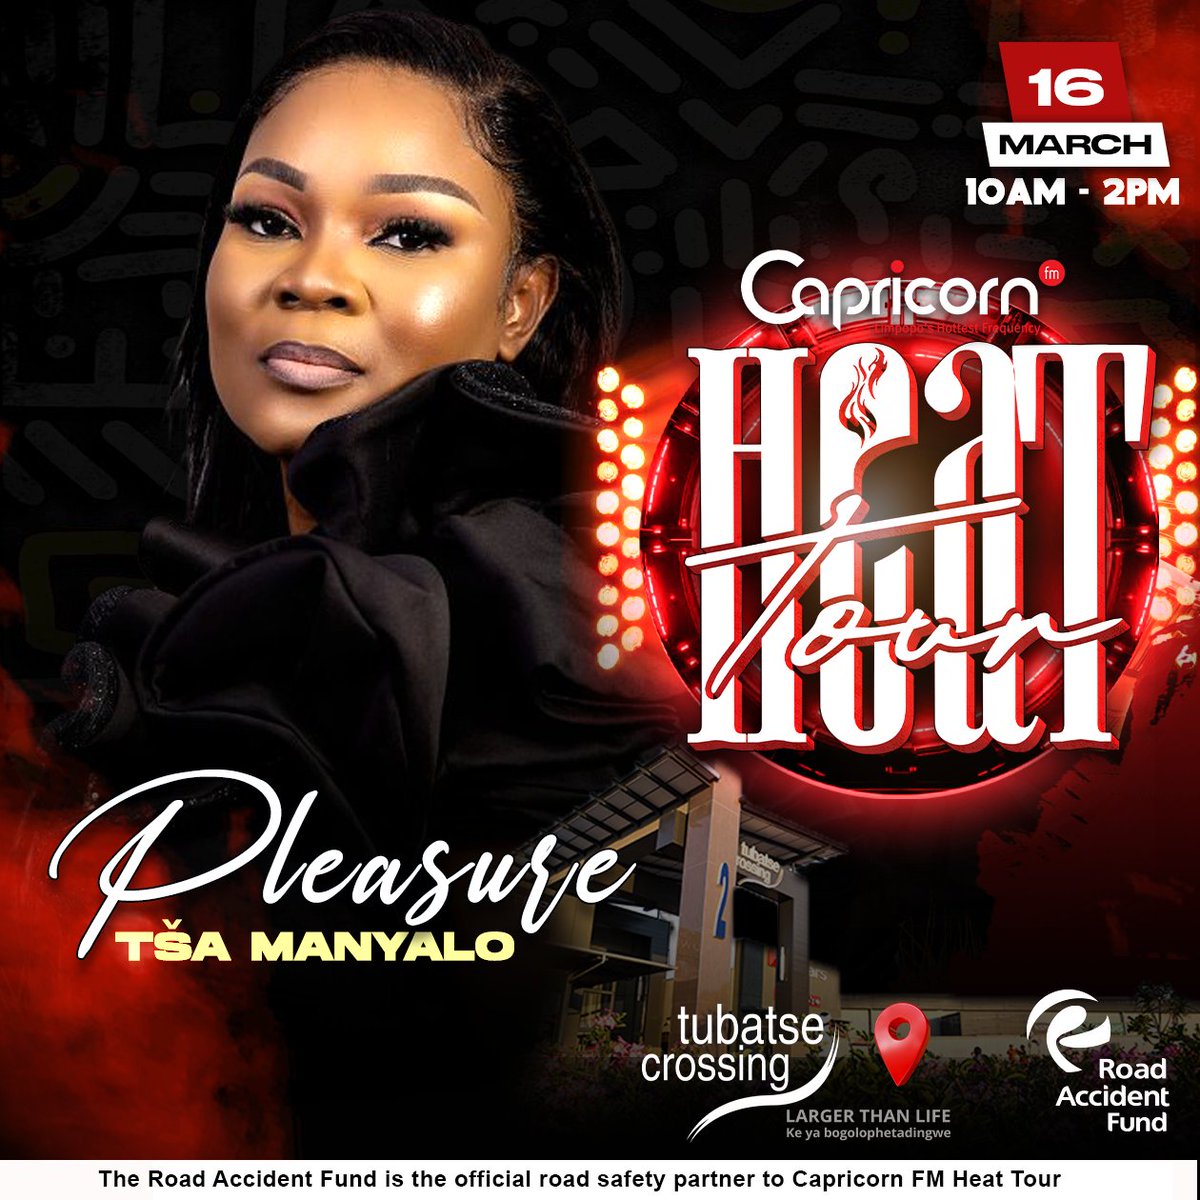 NEXT | The #CapricornFMHeatTour is hitting Tubatse Crossing in Burgersfort this Saturday, @PleasurePeta will take to the stage to entertain you. She joins @DjComplexion and @Mpho_Mashita on the #CapricornBreakfast to share what you can look forward to.